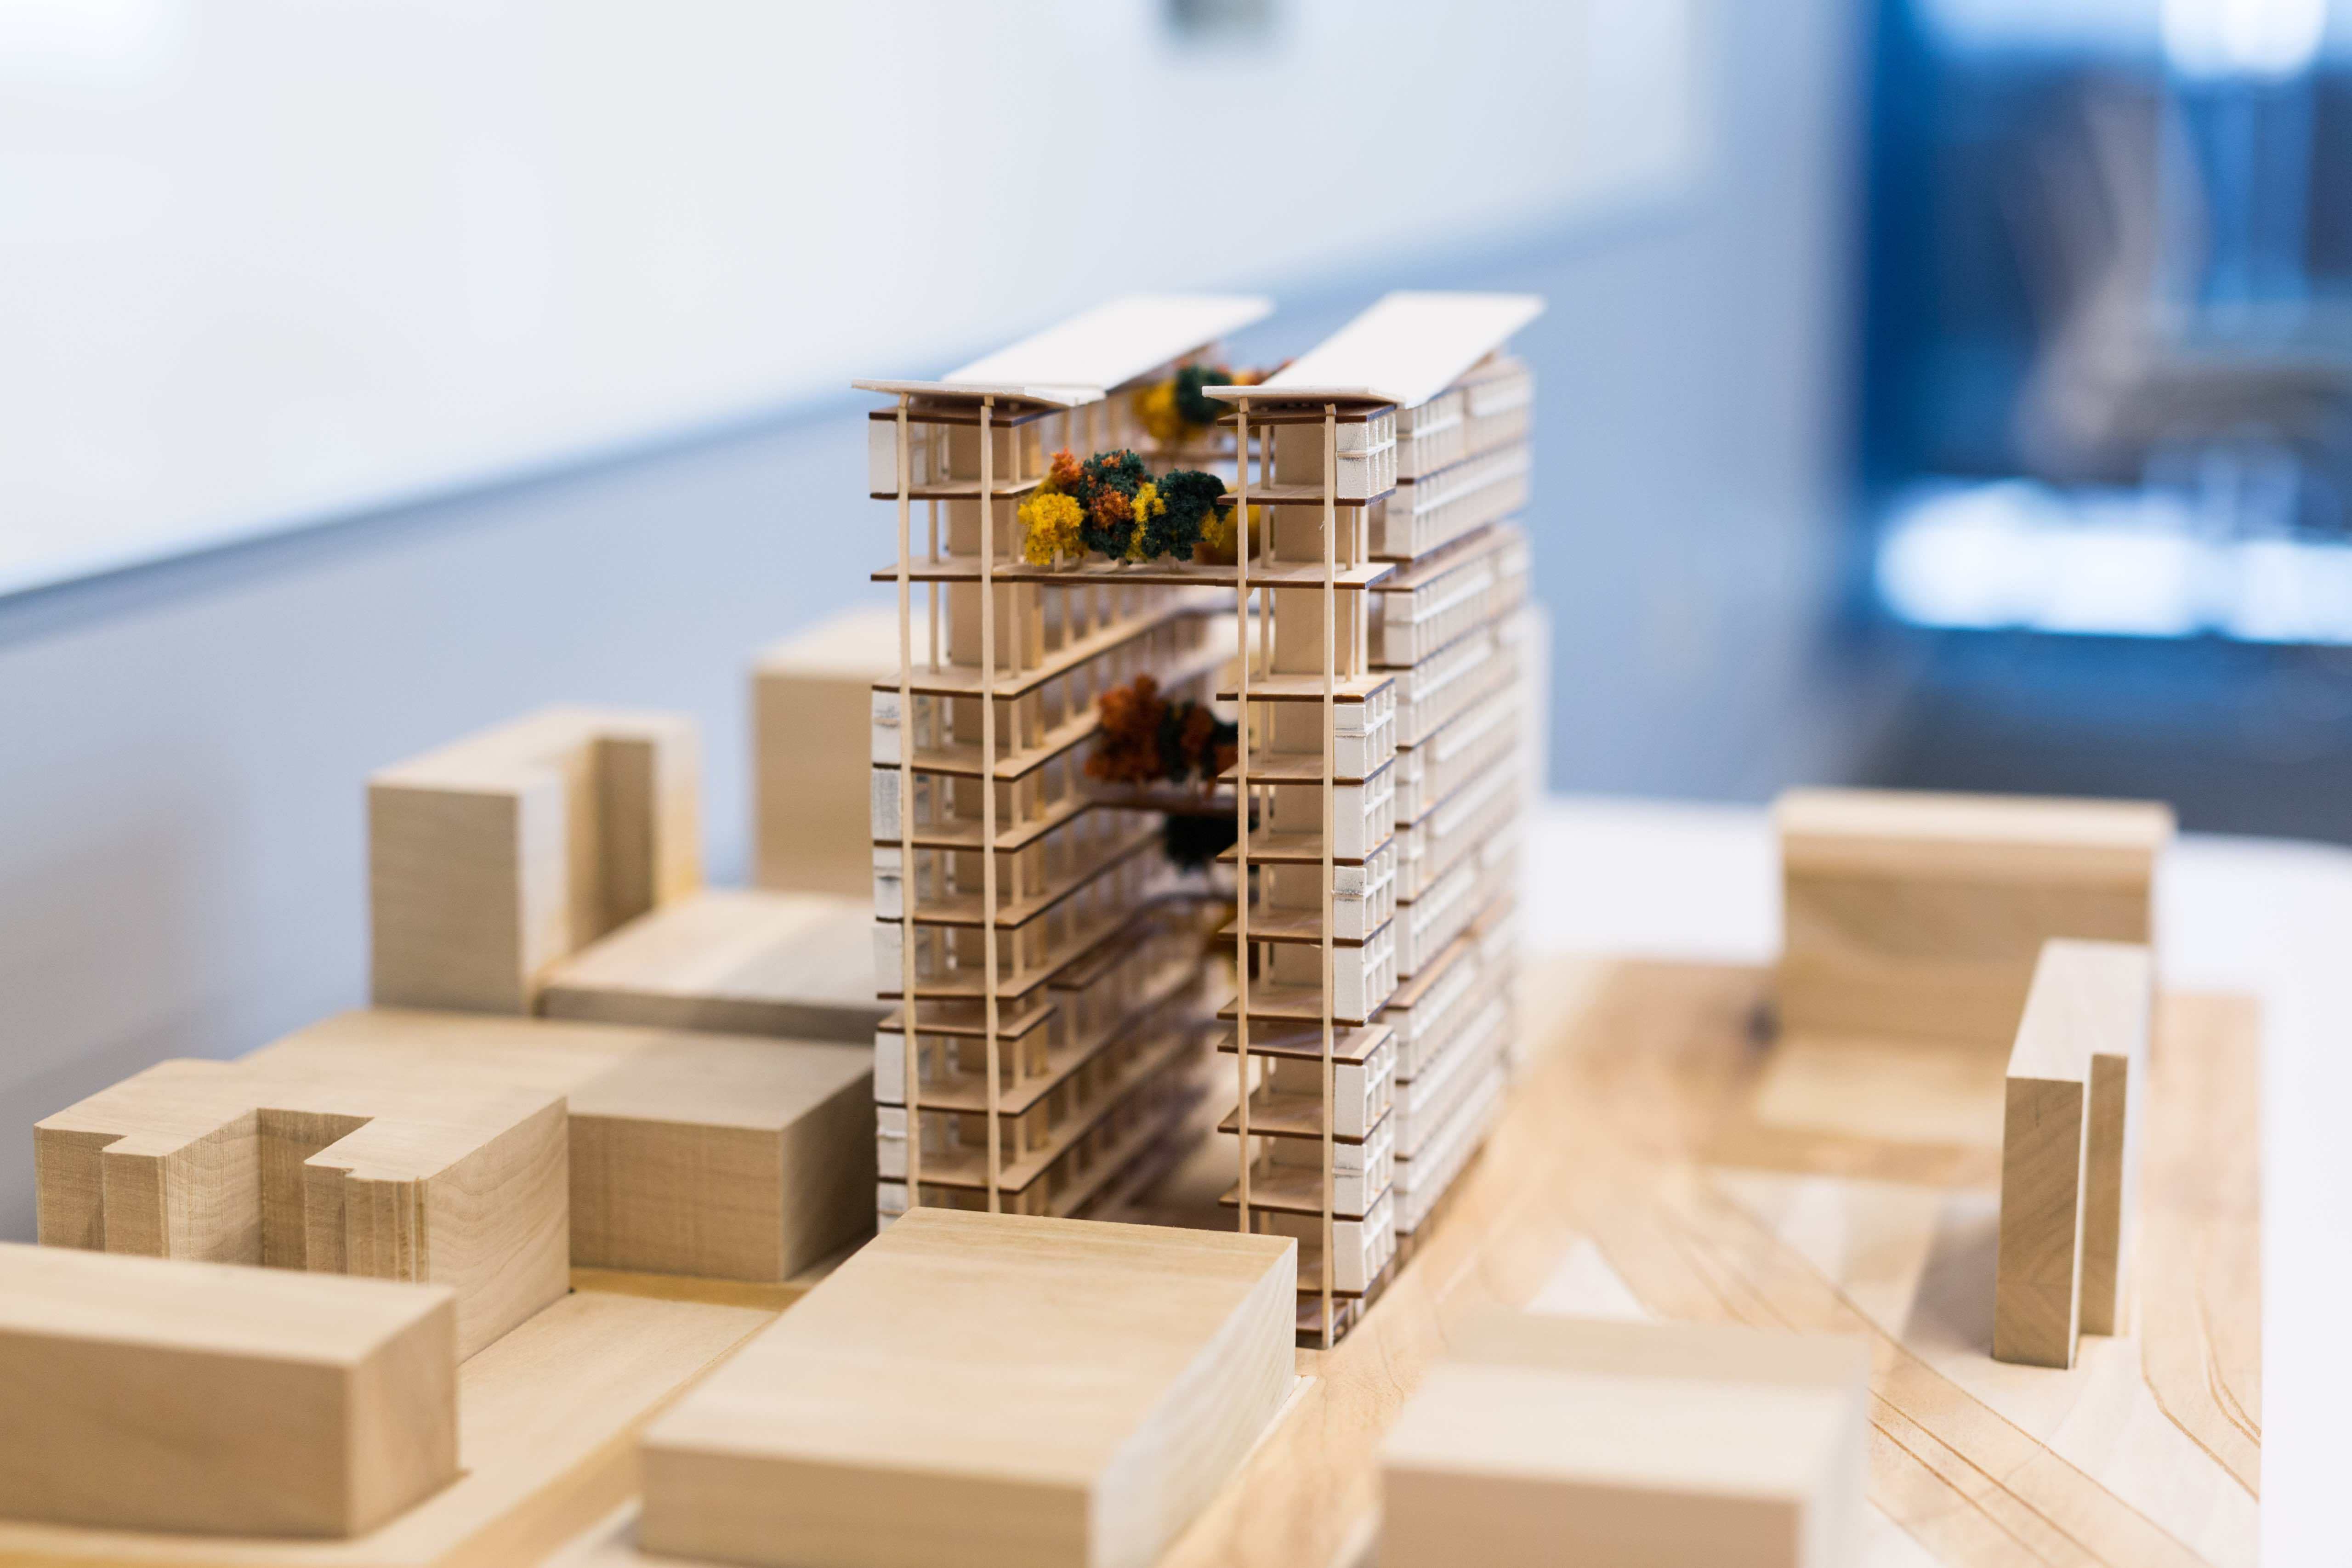 University of Tennessee Architecture Students Design Tall Wood ...